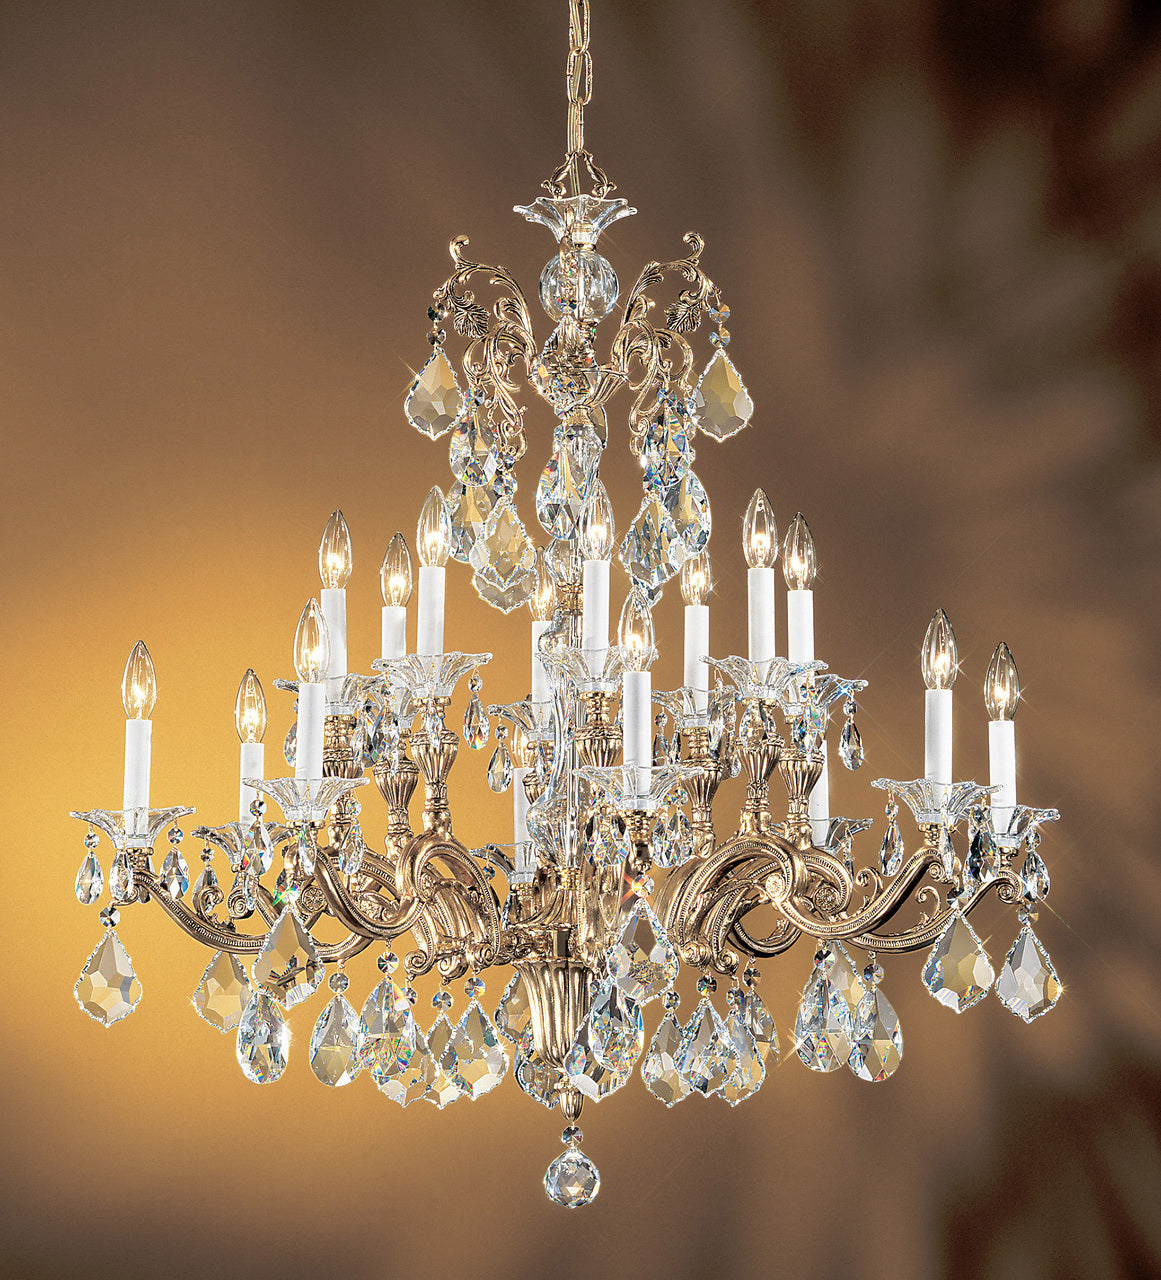 Classic Lighting 57116 BBK IRA Via Firenze Crystal Chandelier in Bronze/Black Patina (Imported from Spain)